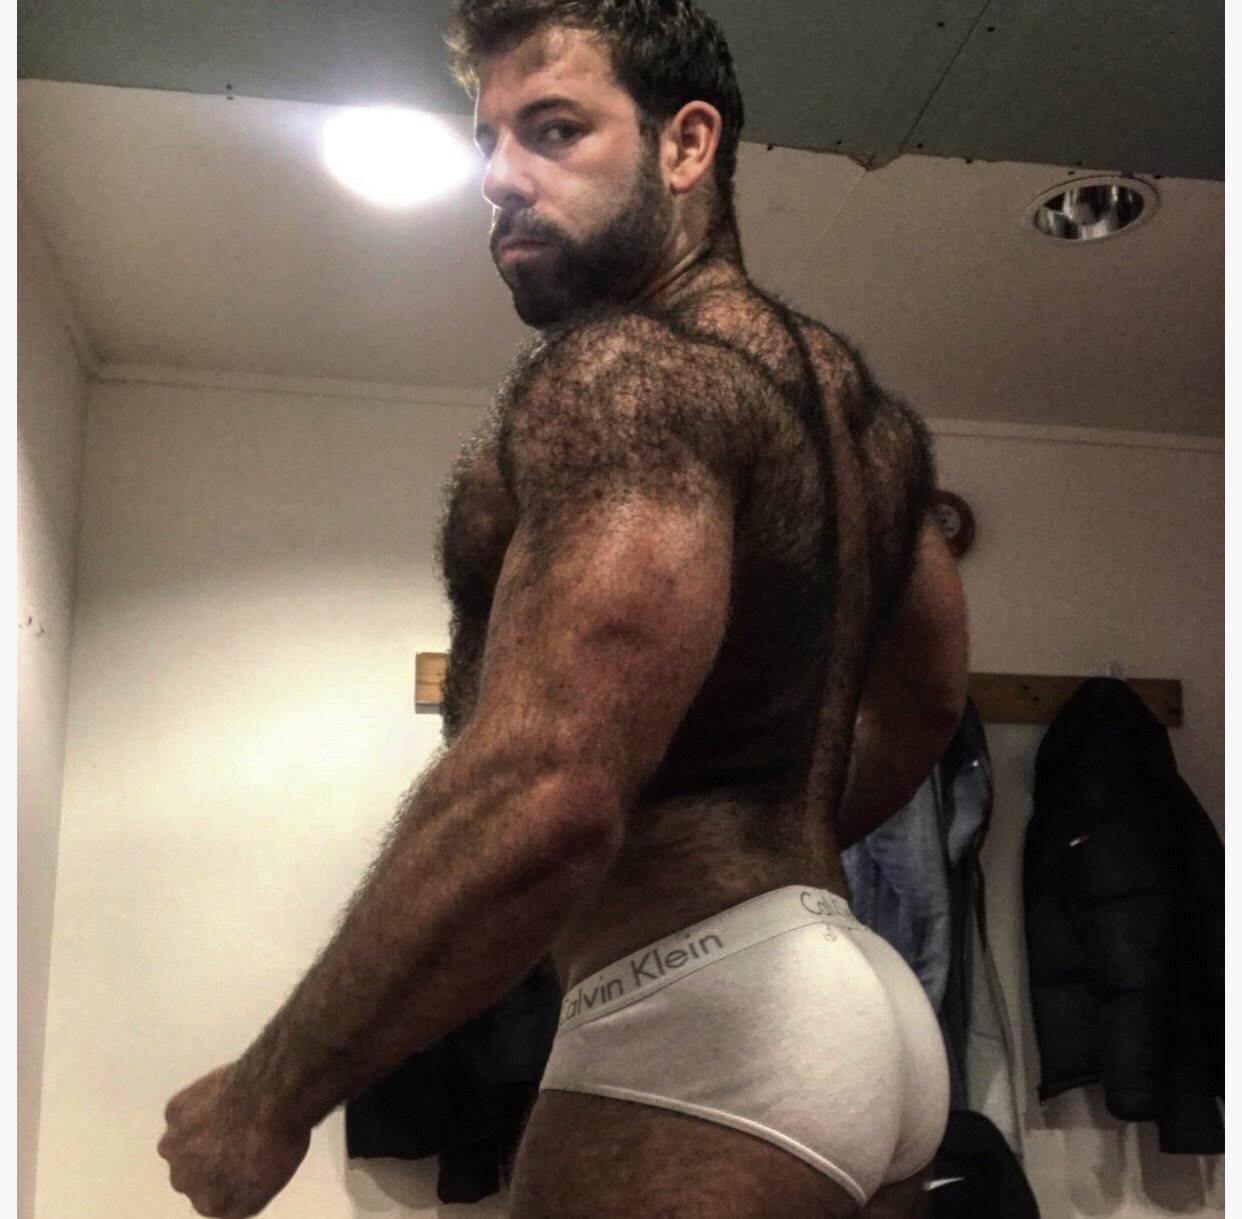 Photo by Smitty with the username @Resol702,  March 31, 2019 at 3:20 AM. The post is about the topic Hairy bears